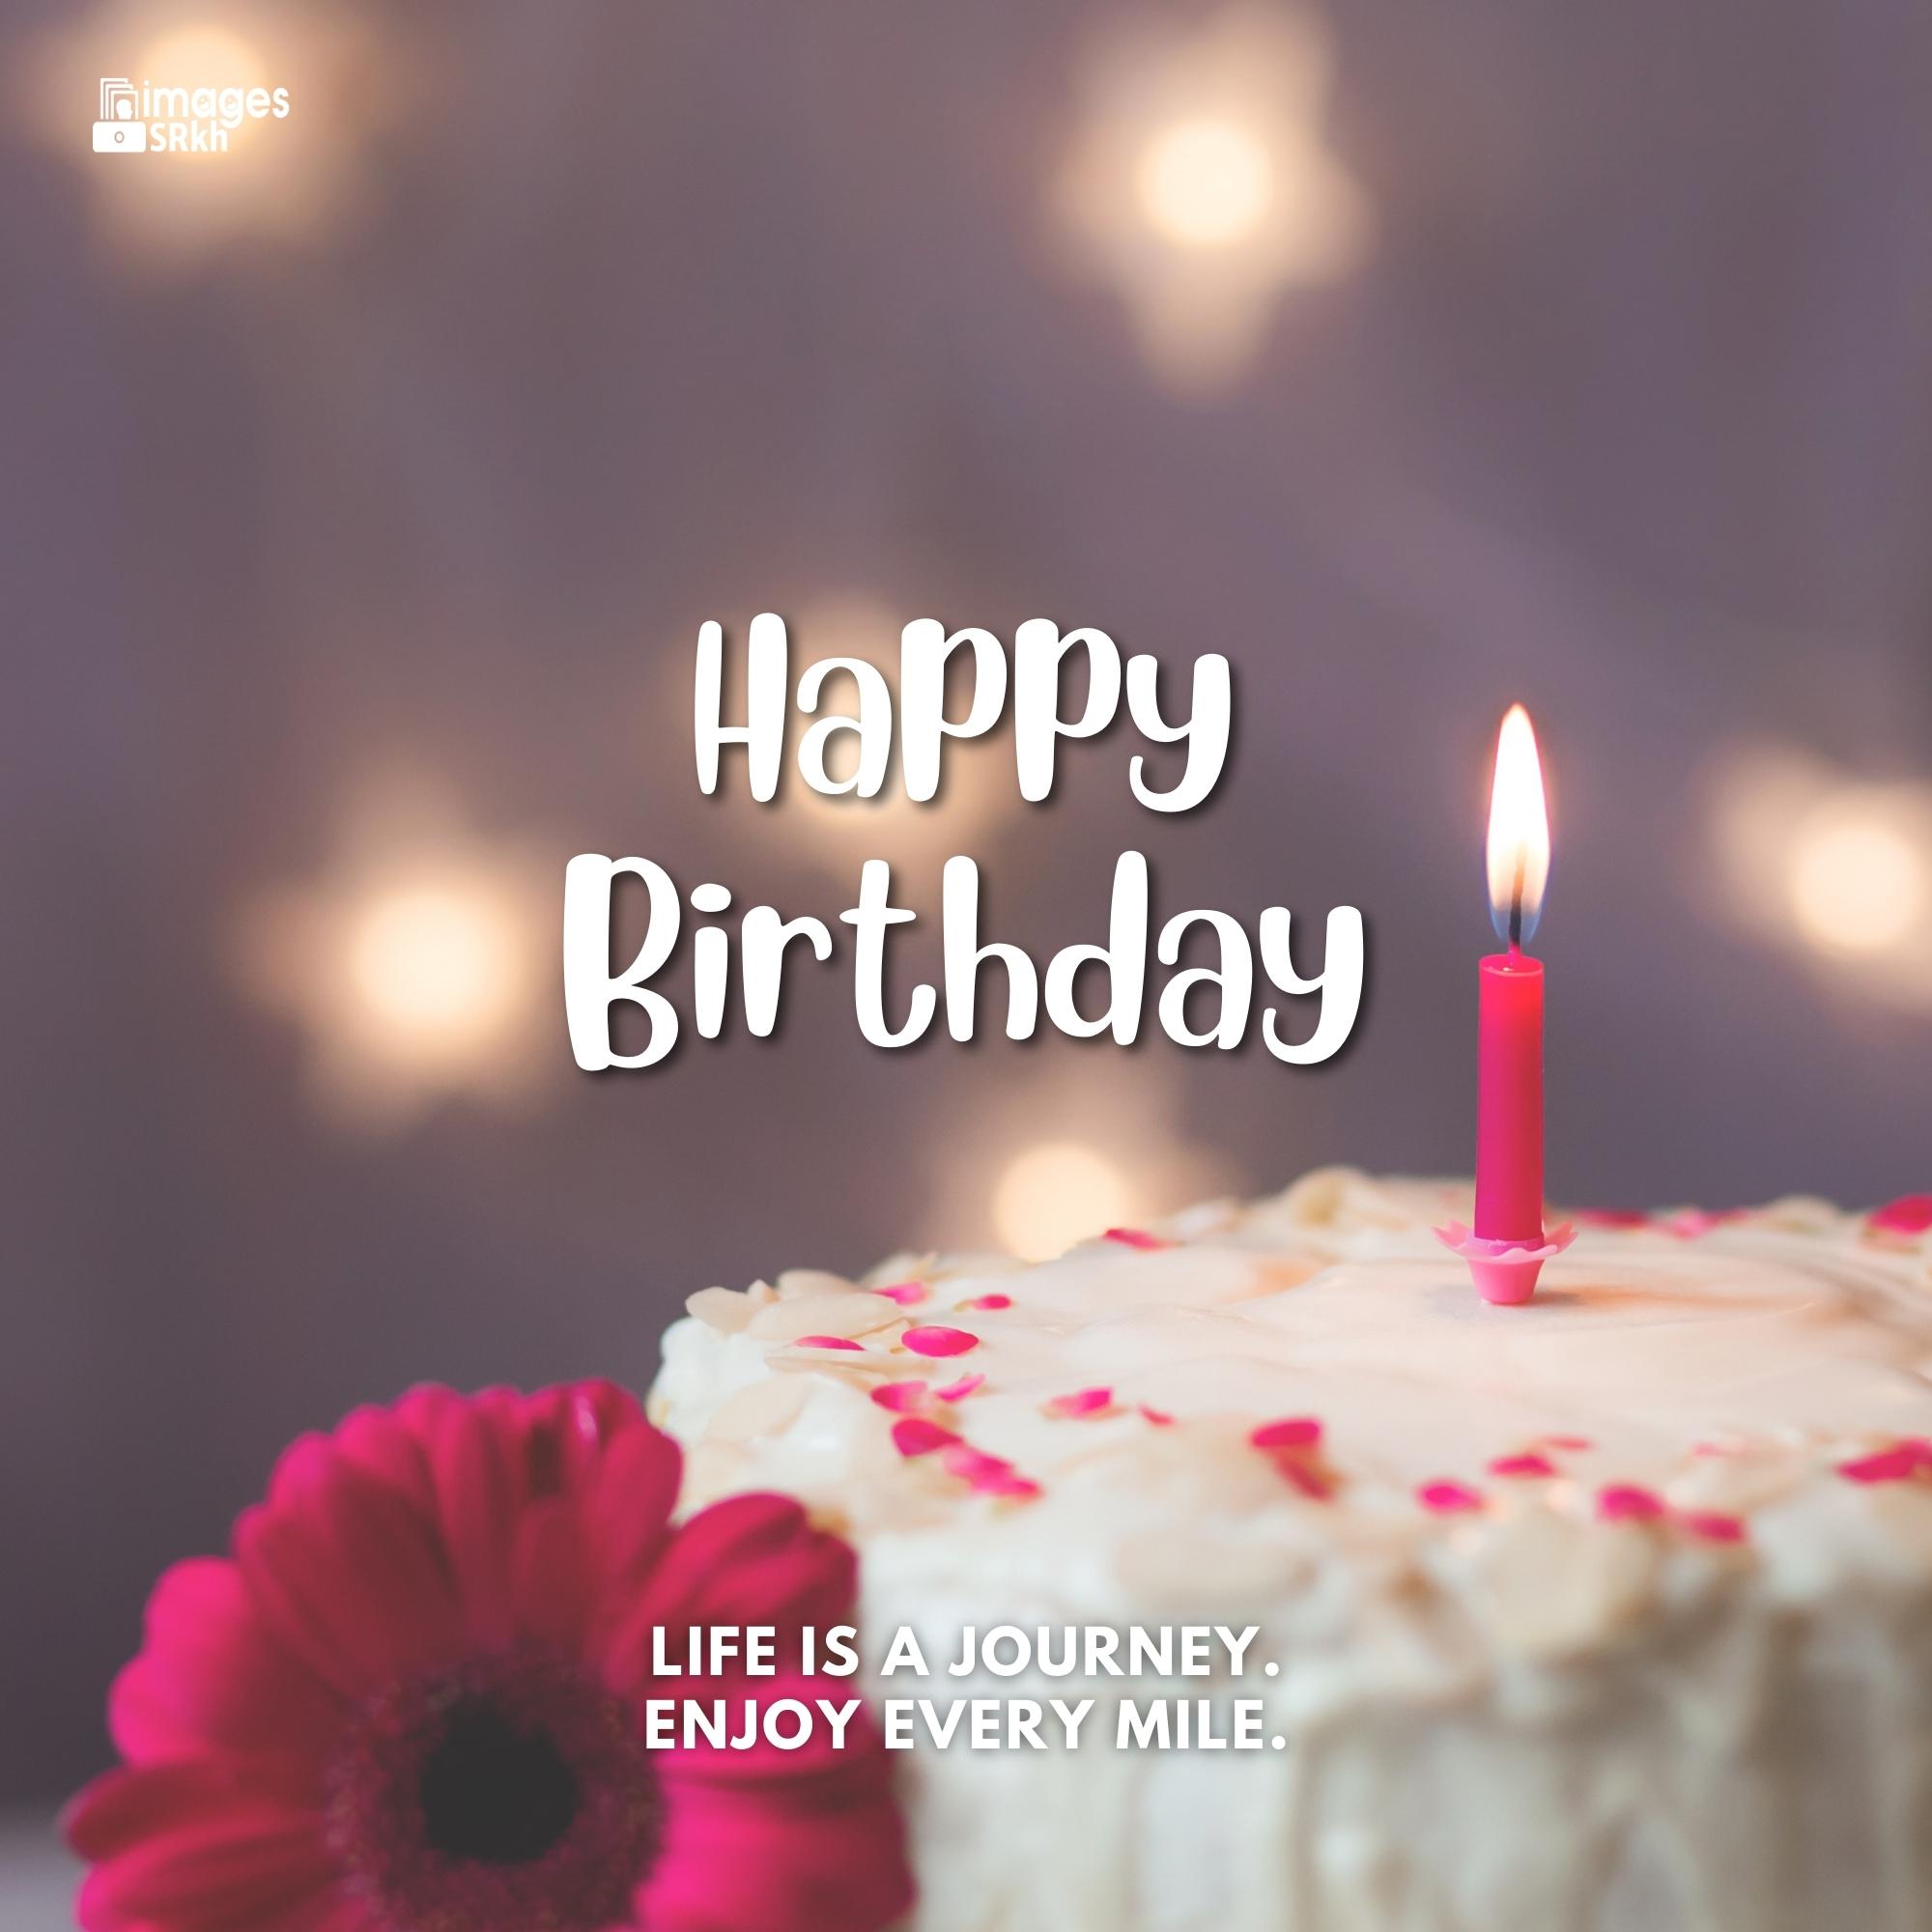 Happy Birthday Images With Quotation